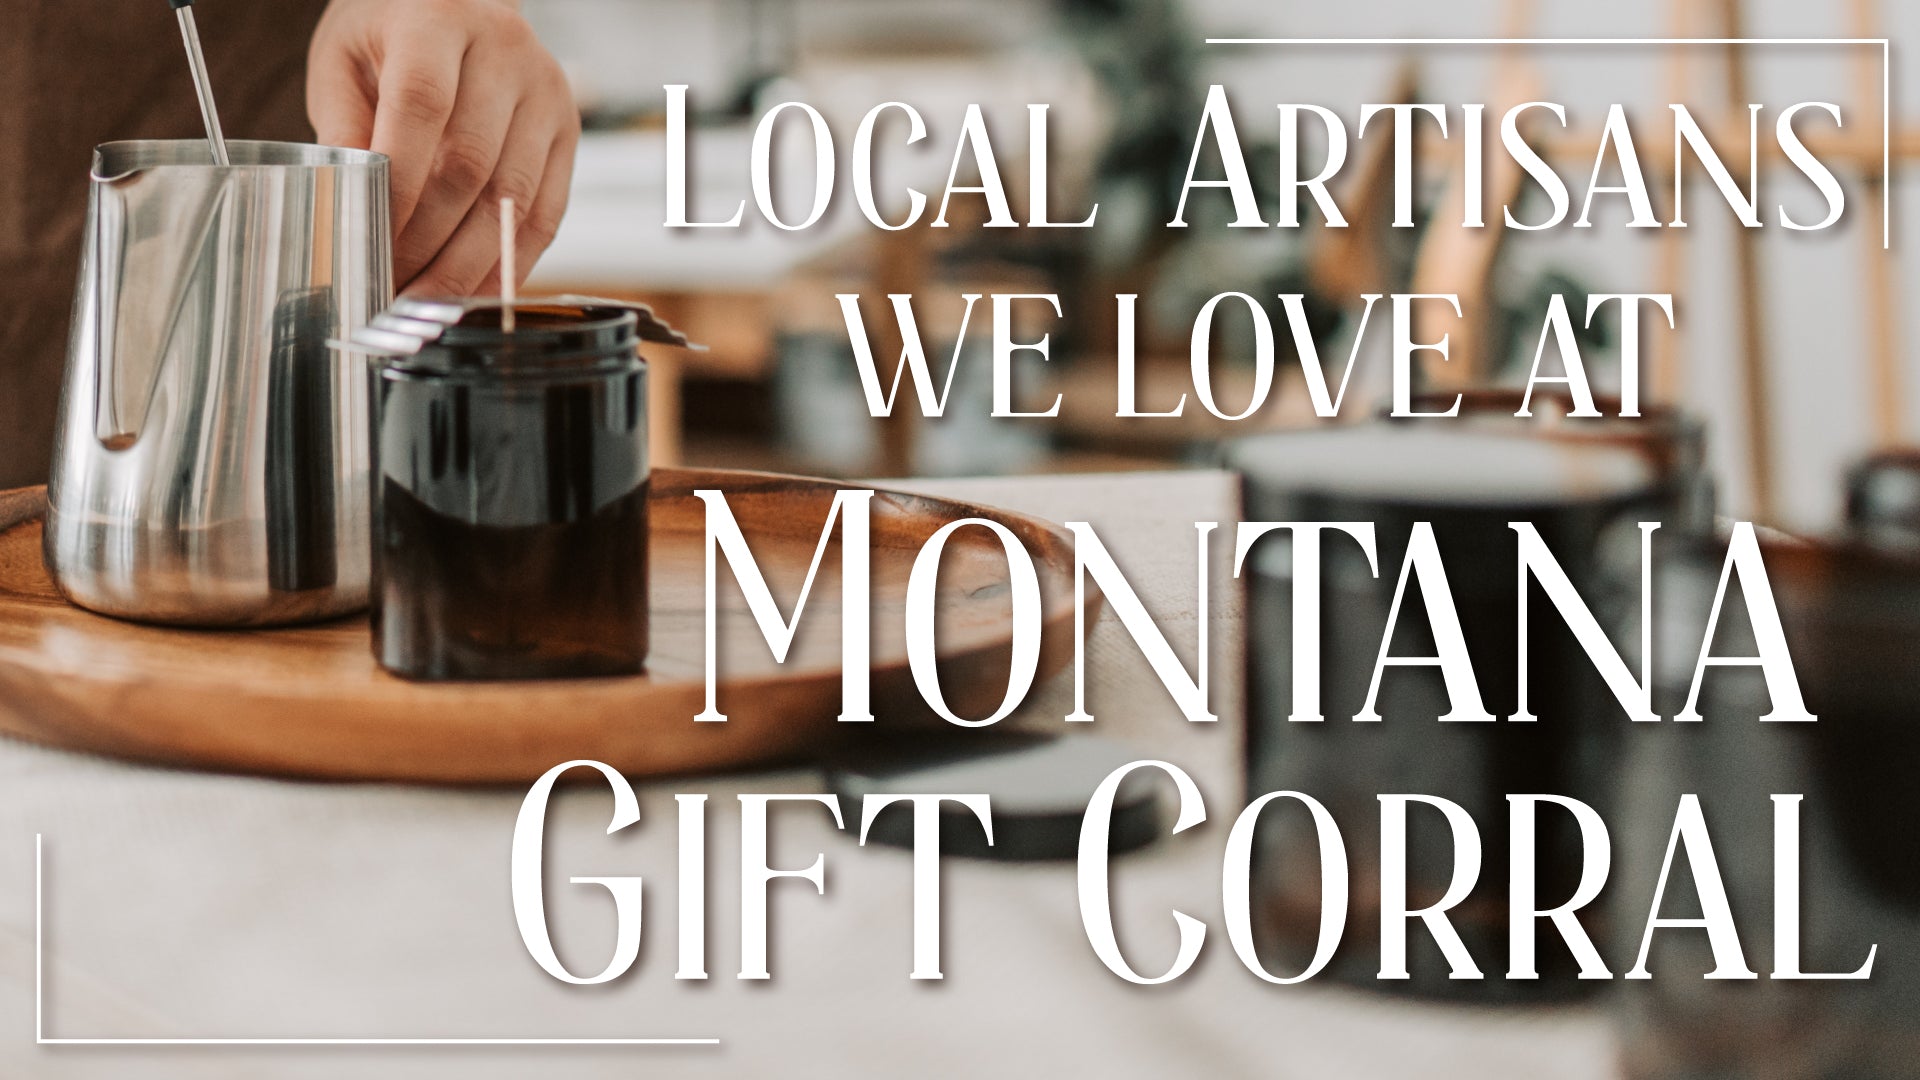 Local Artisans We Love at Montana Gift Corral